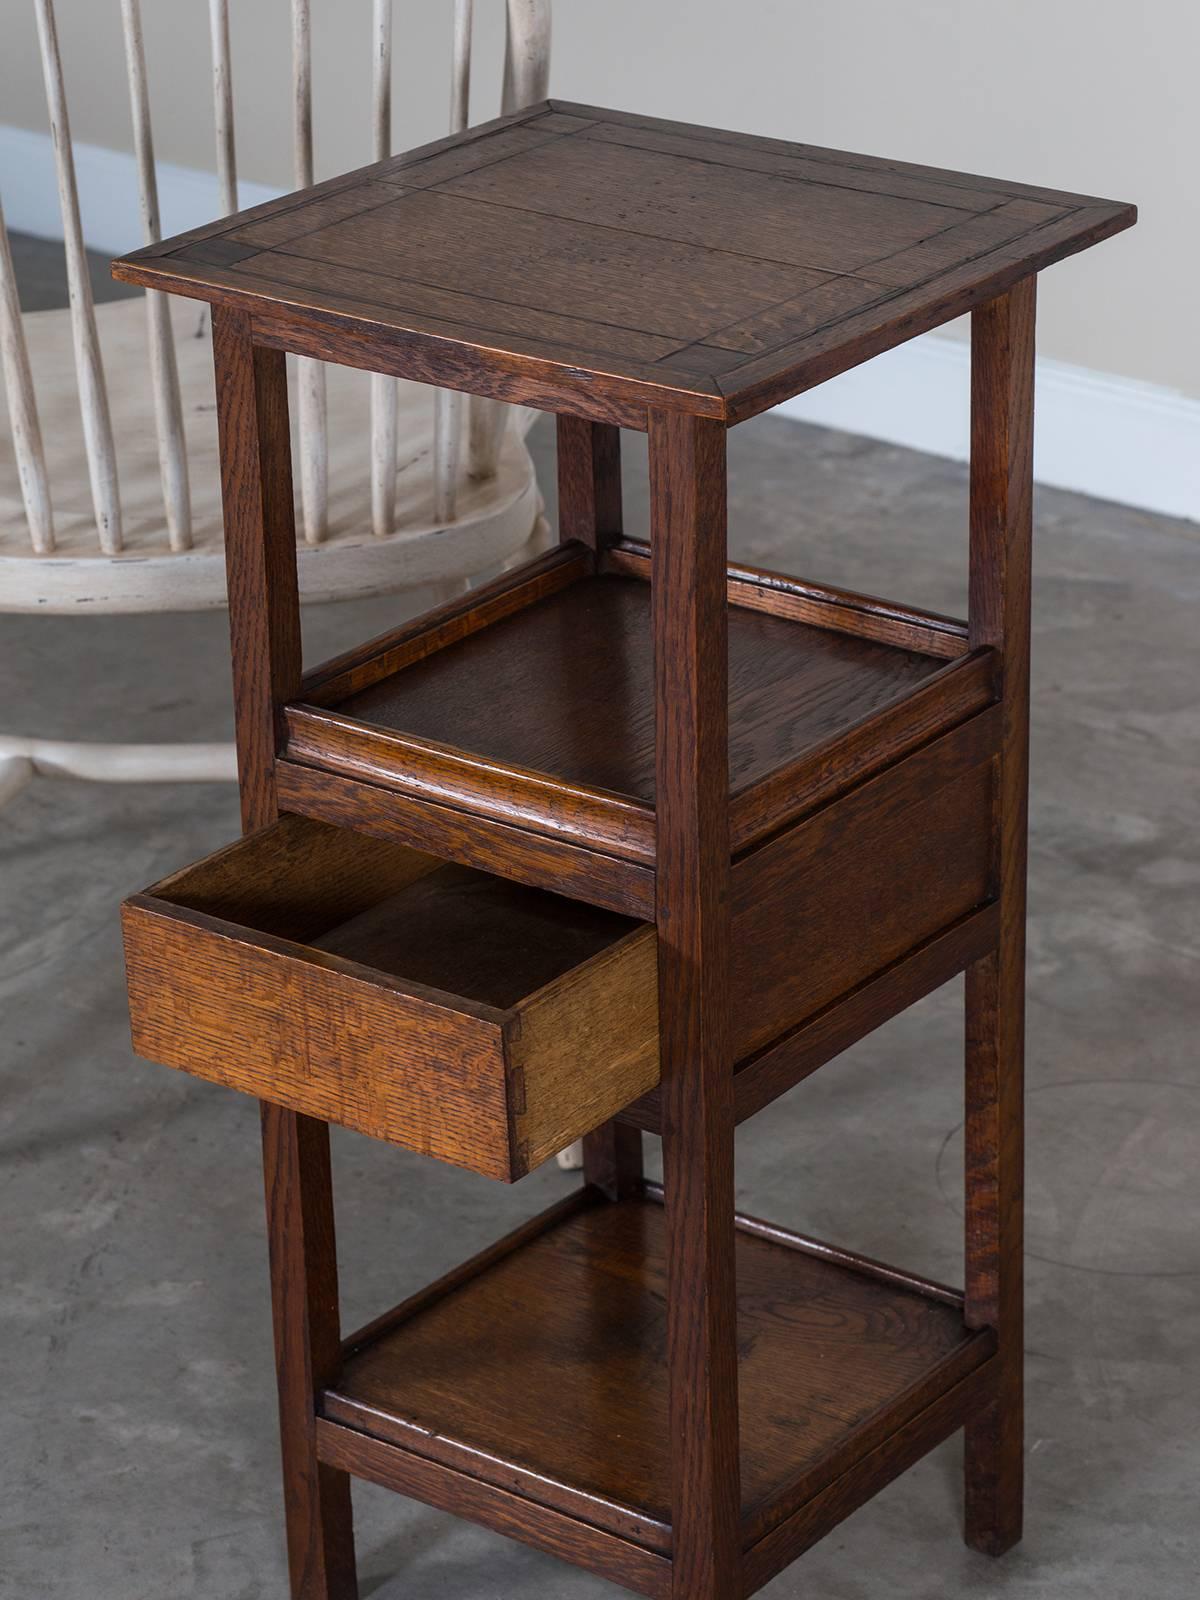 Late 19th Century Antique English Arts and Crafts Three-Tier Oak Table, Hidden Drawer, circa 1885